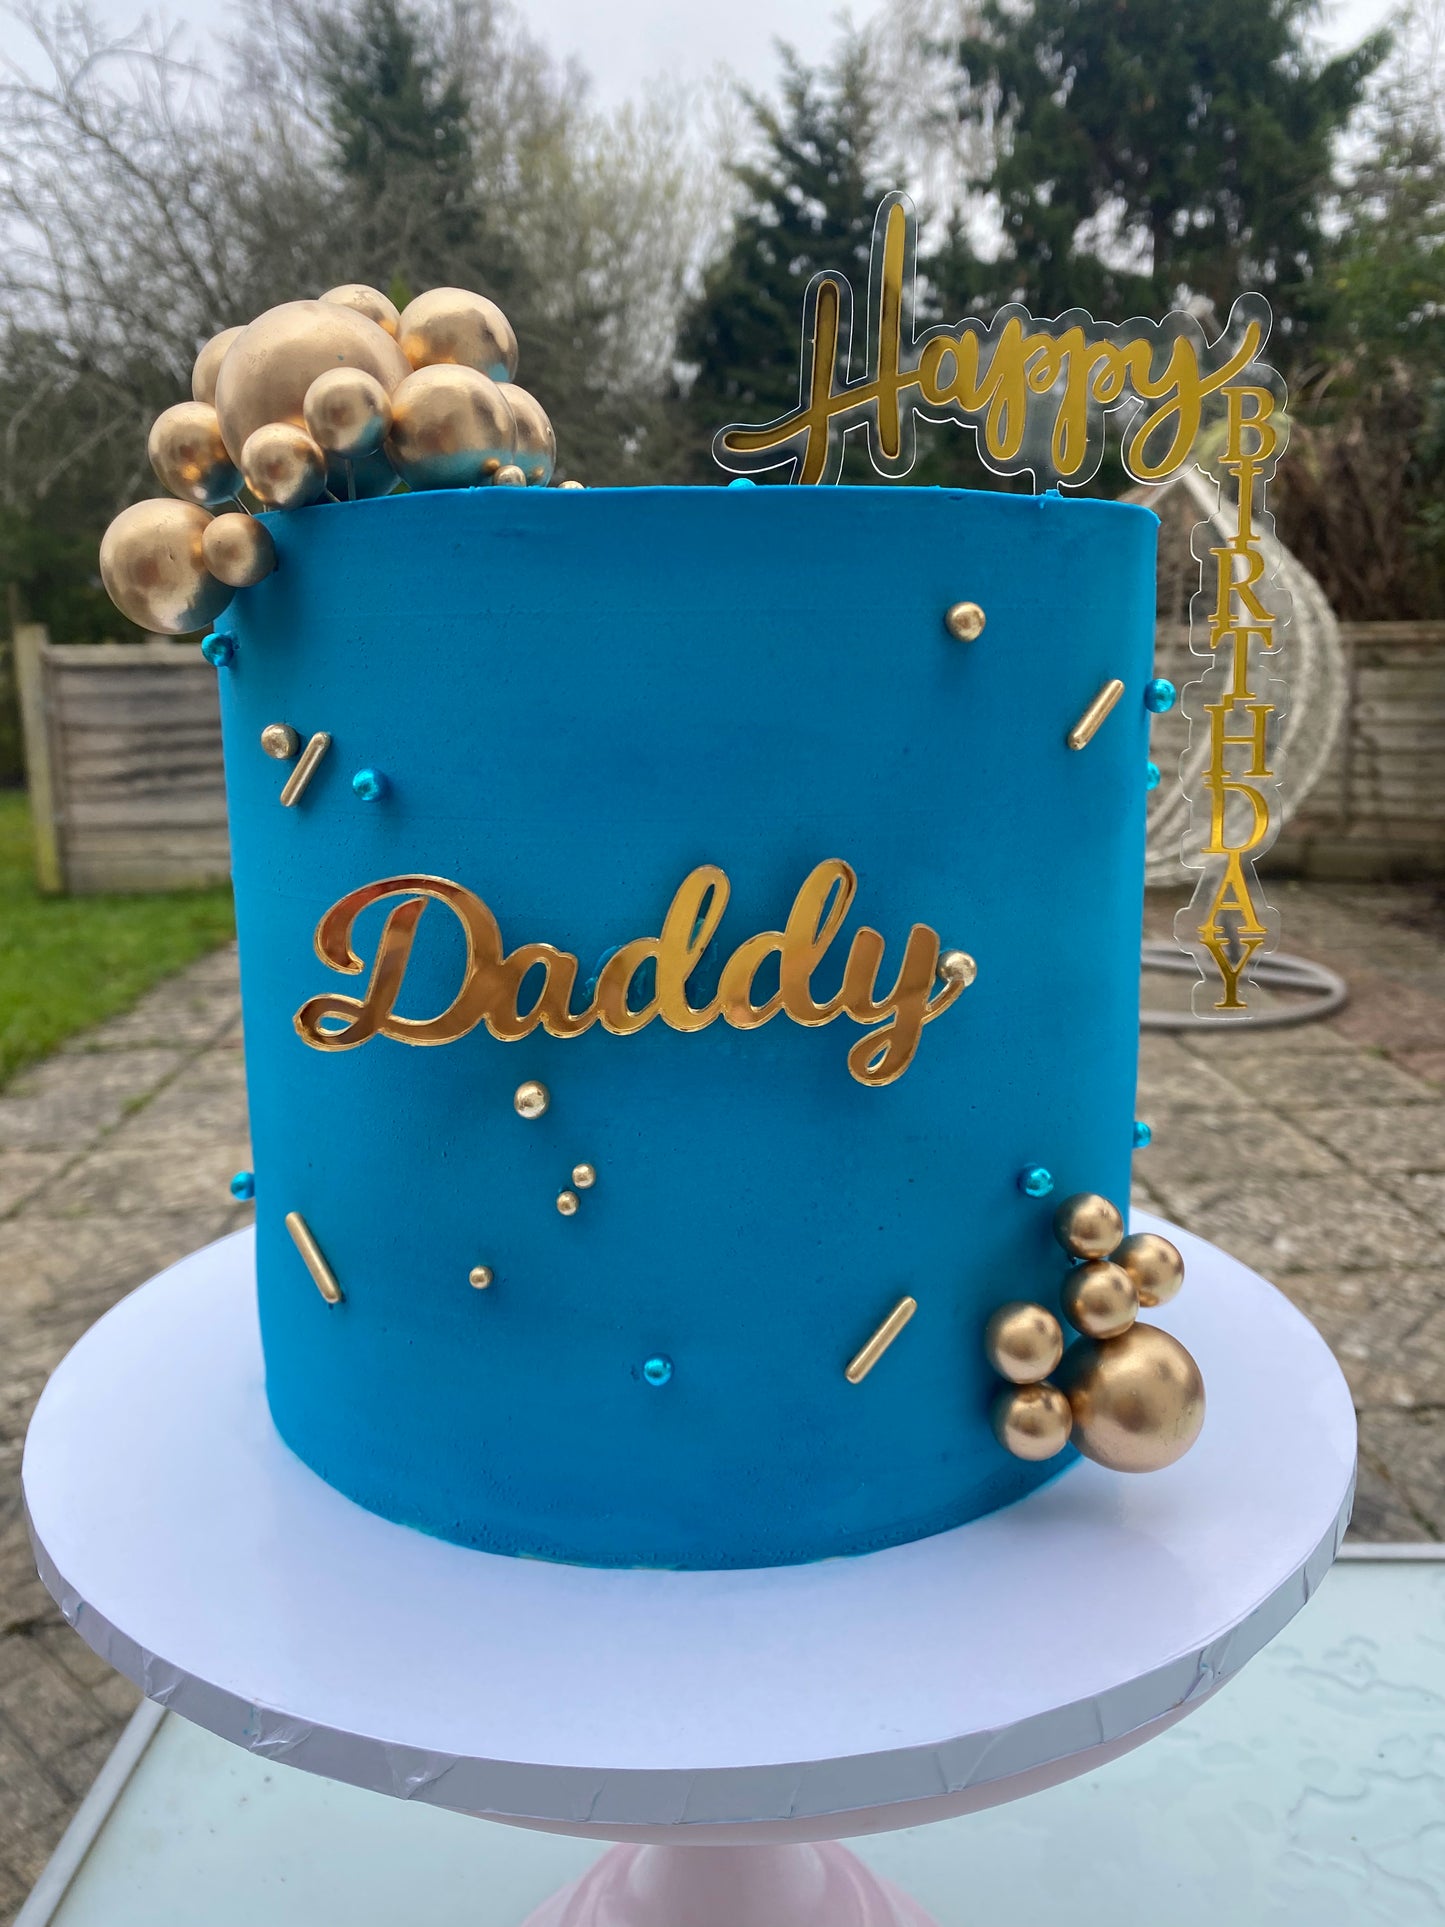 Deep blue cake with gold ball decorations